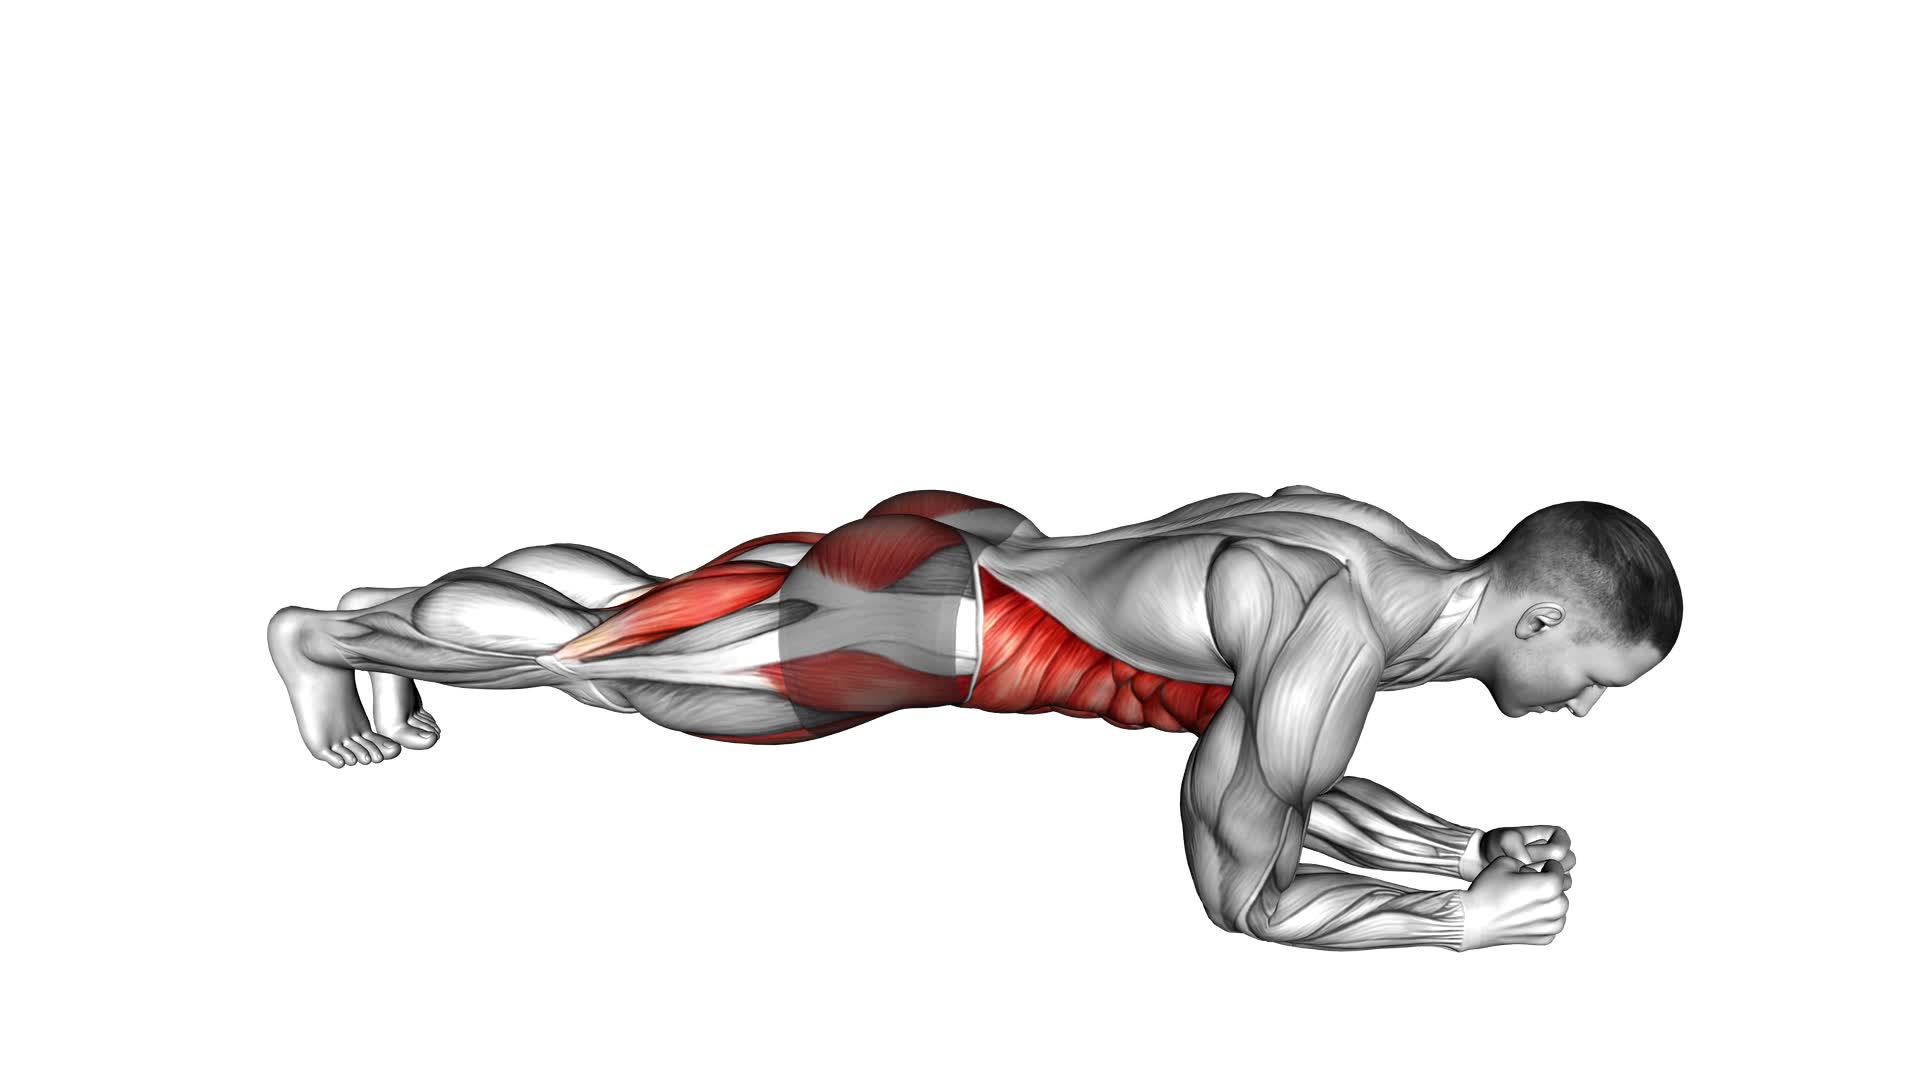 Leg Lift to Chest Front Plank - Video Exercise Guide & Tips